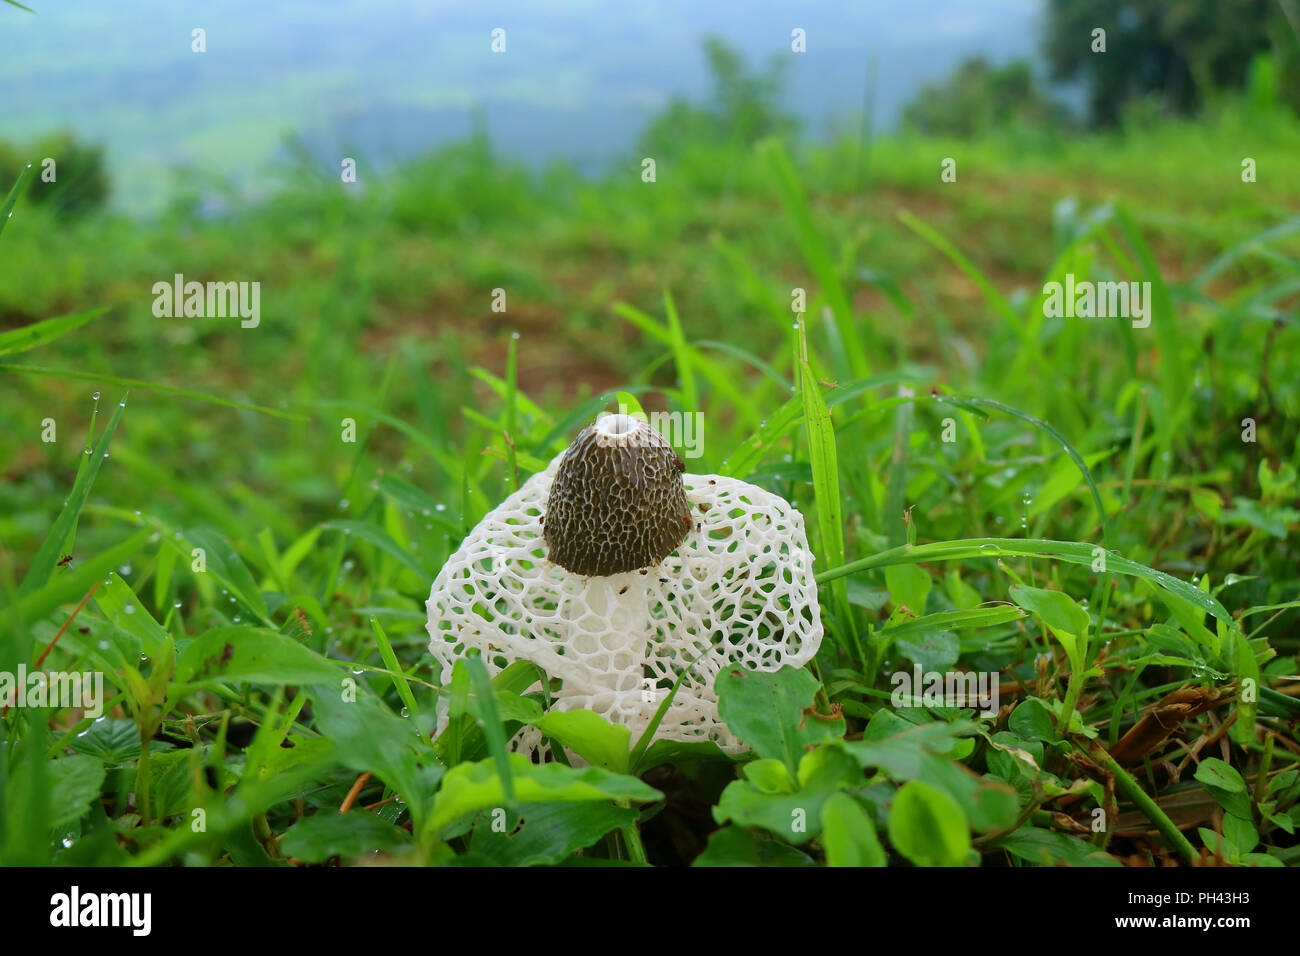 White Long Net Stinkhorn Mushroom or Bamboo Fungus Among Green Grass with Morning Dew Stock Photo